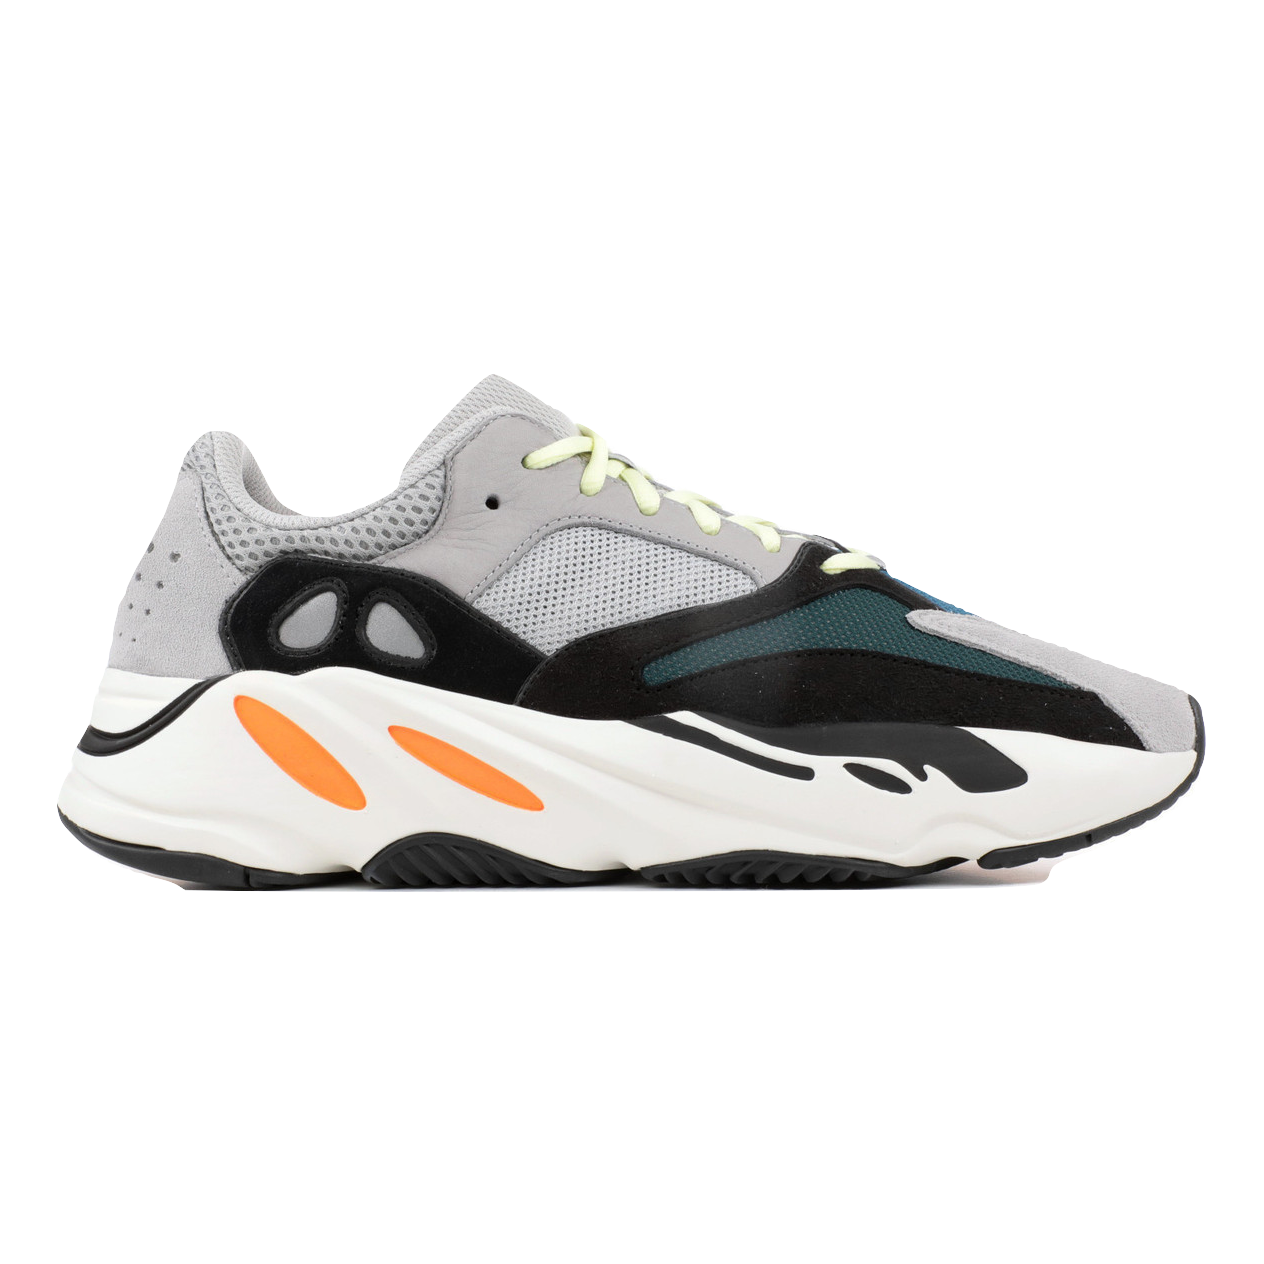 Yeezy Boost 700 - Wave Runner - Used